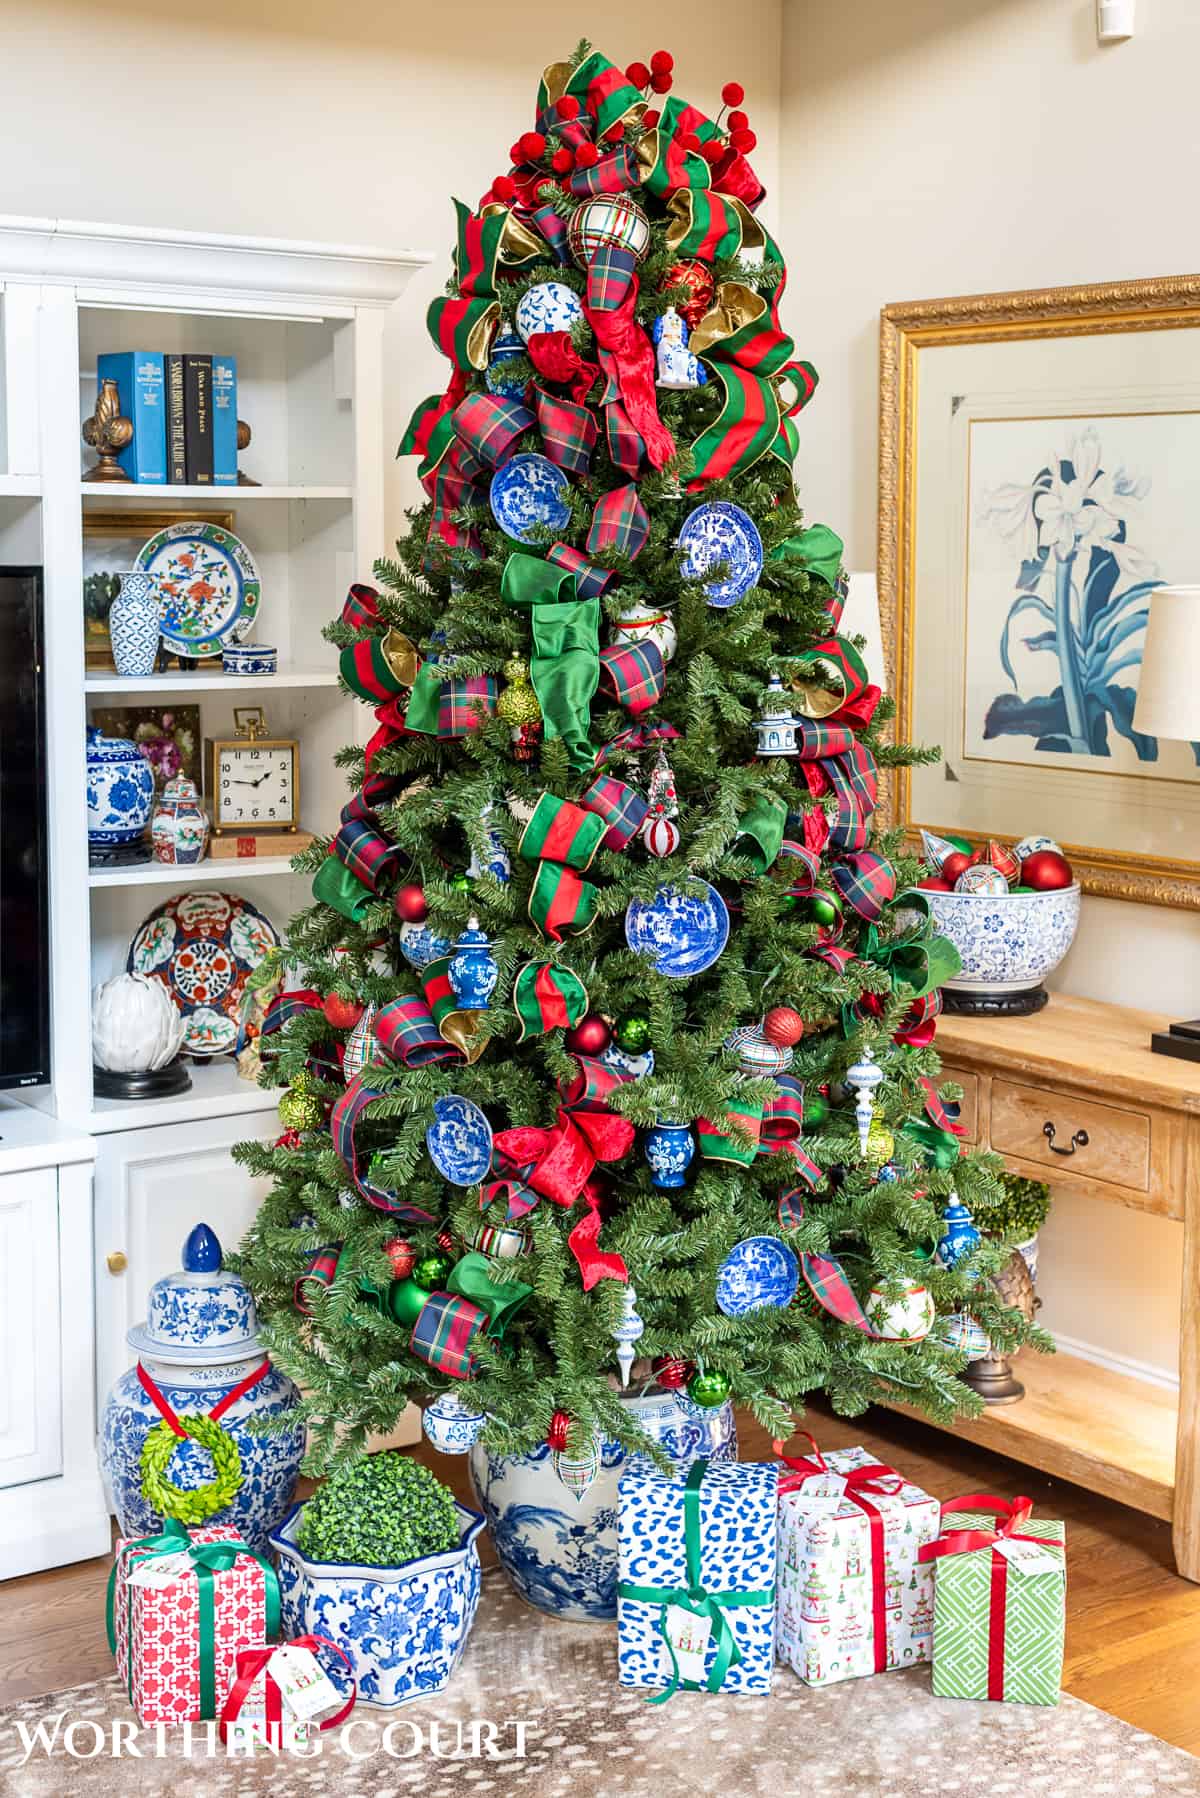 Christmas tree with traditional decorations in red, green, blue and white in a chinoiserie planters